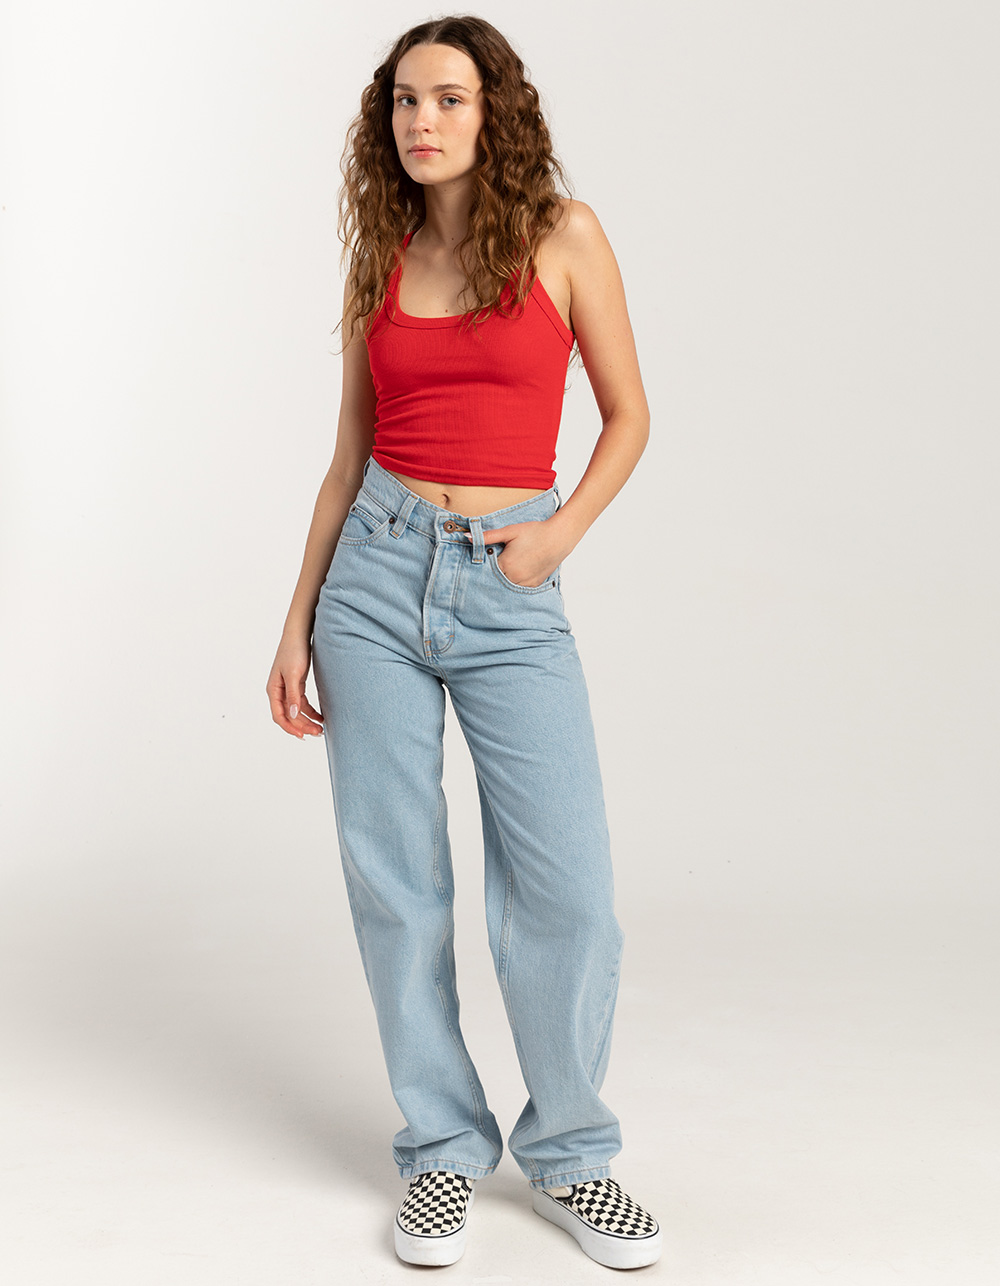 High-Waisted Jeans for Women